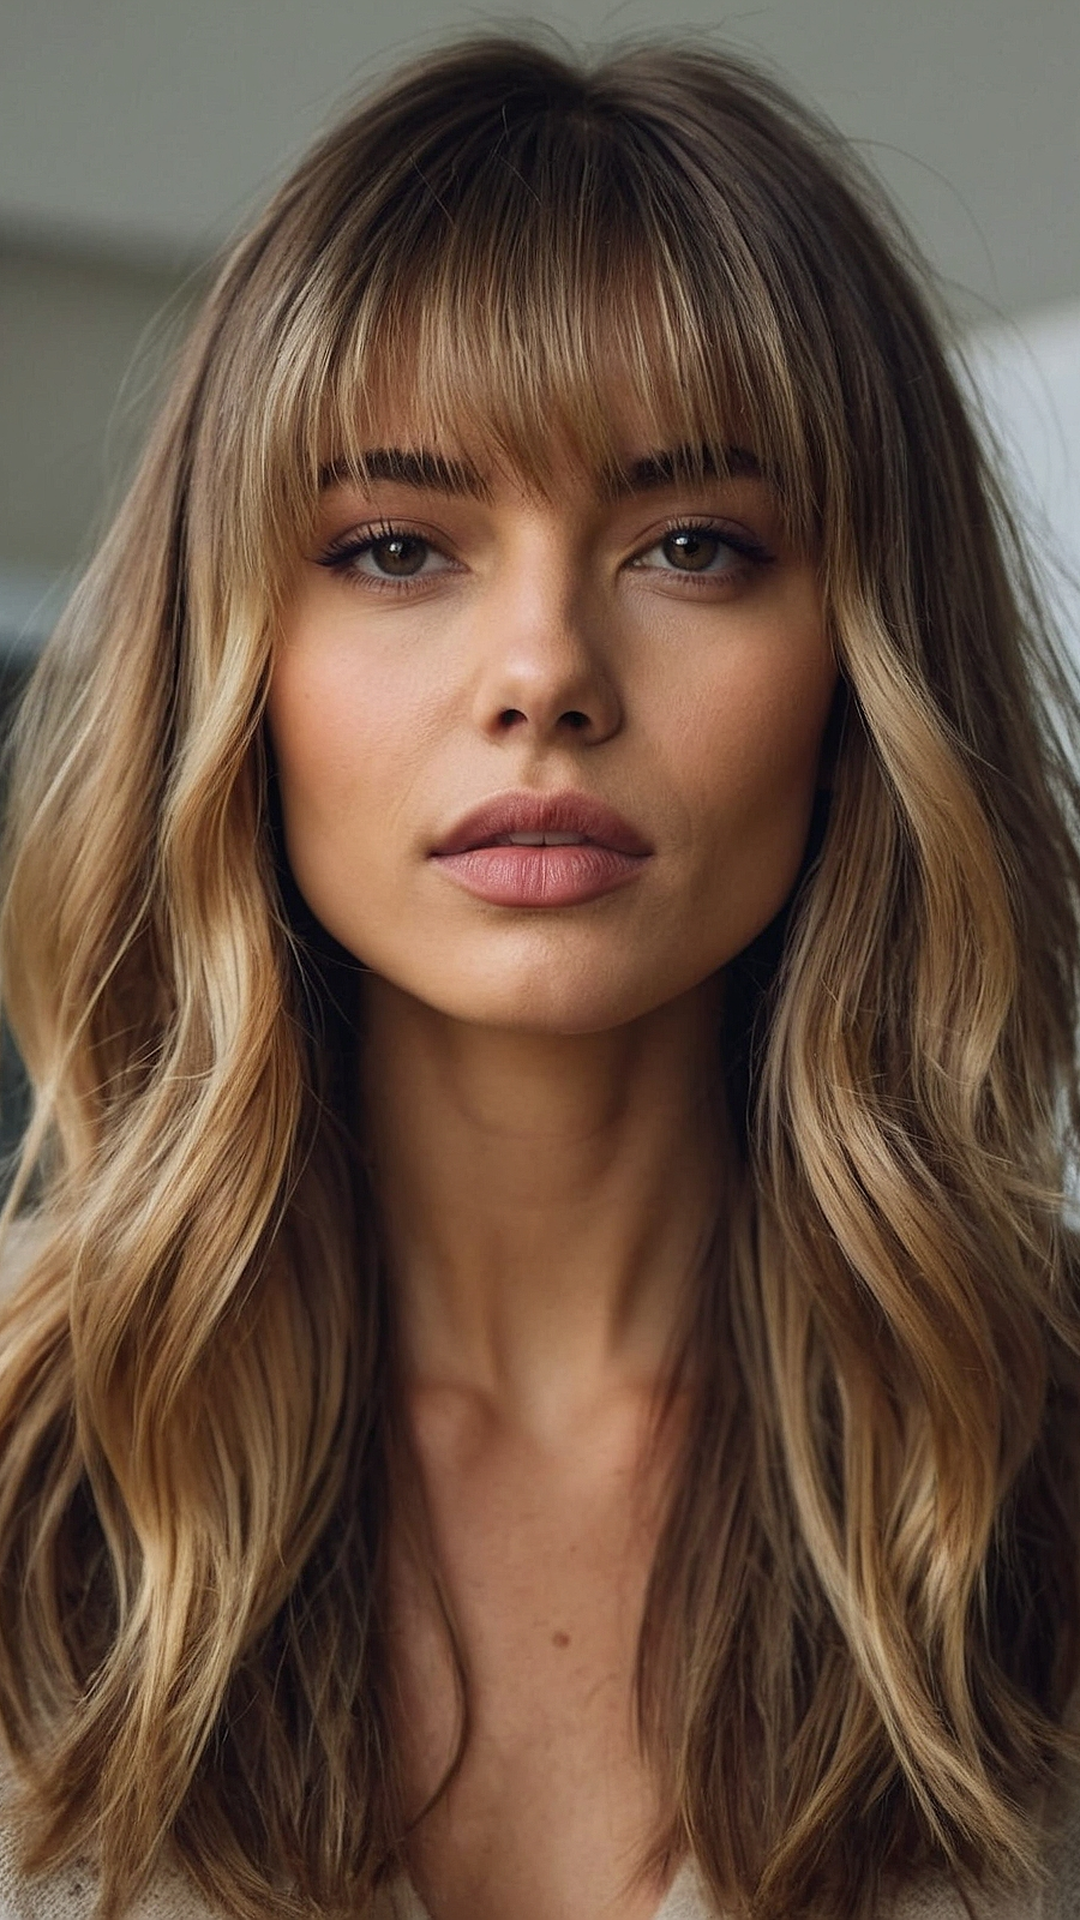 Volume-Boosting Styles for Fine Hair